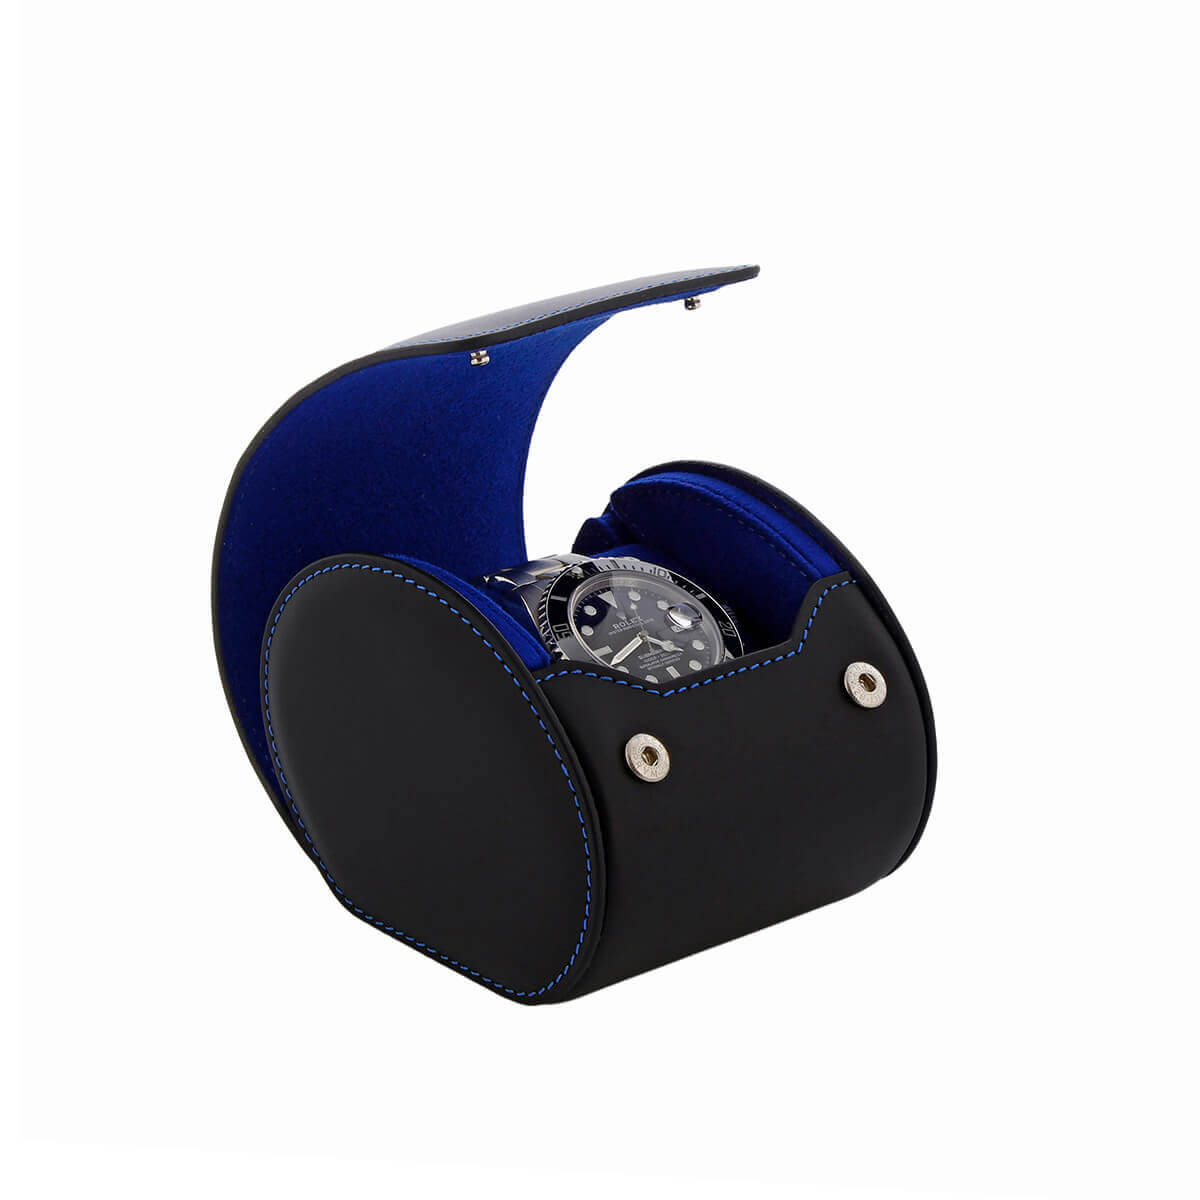 Single Watch Roll Case in Premium Black Nappa Leather with Blue Lining by Aevitas